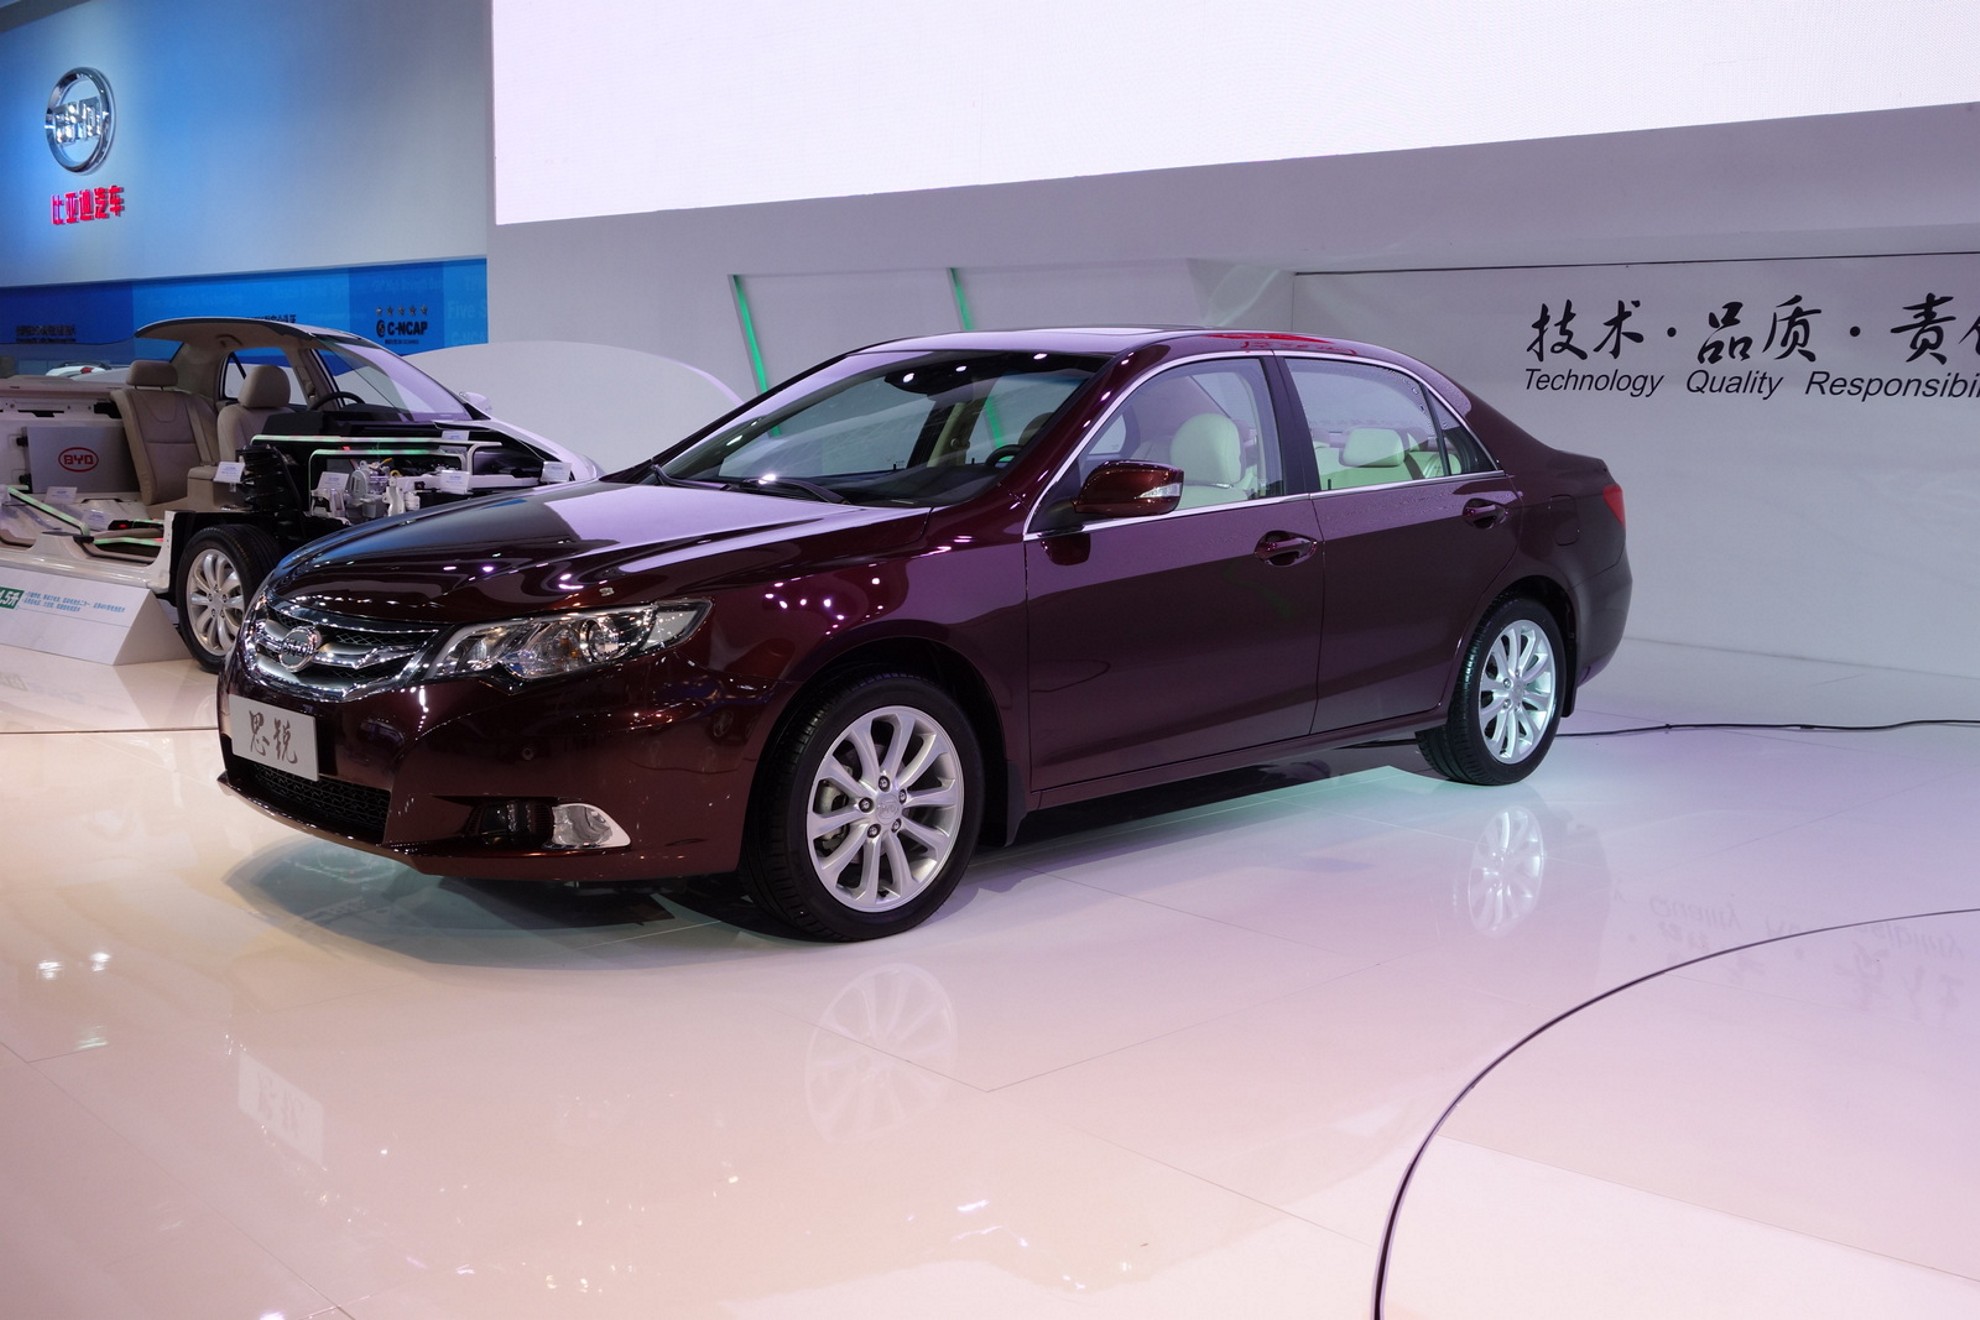 Images: BYD at the Shanghai Auto Show 2013